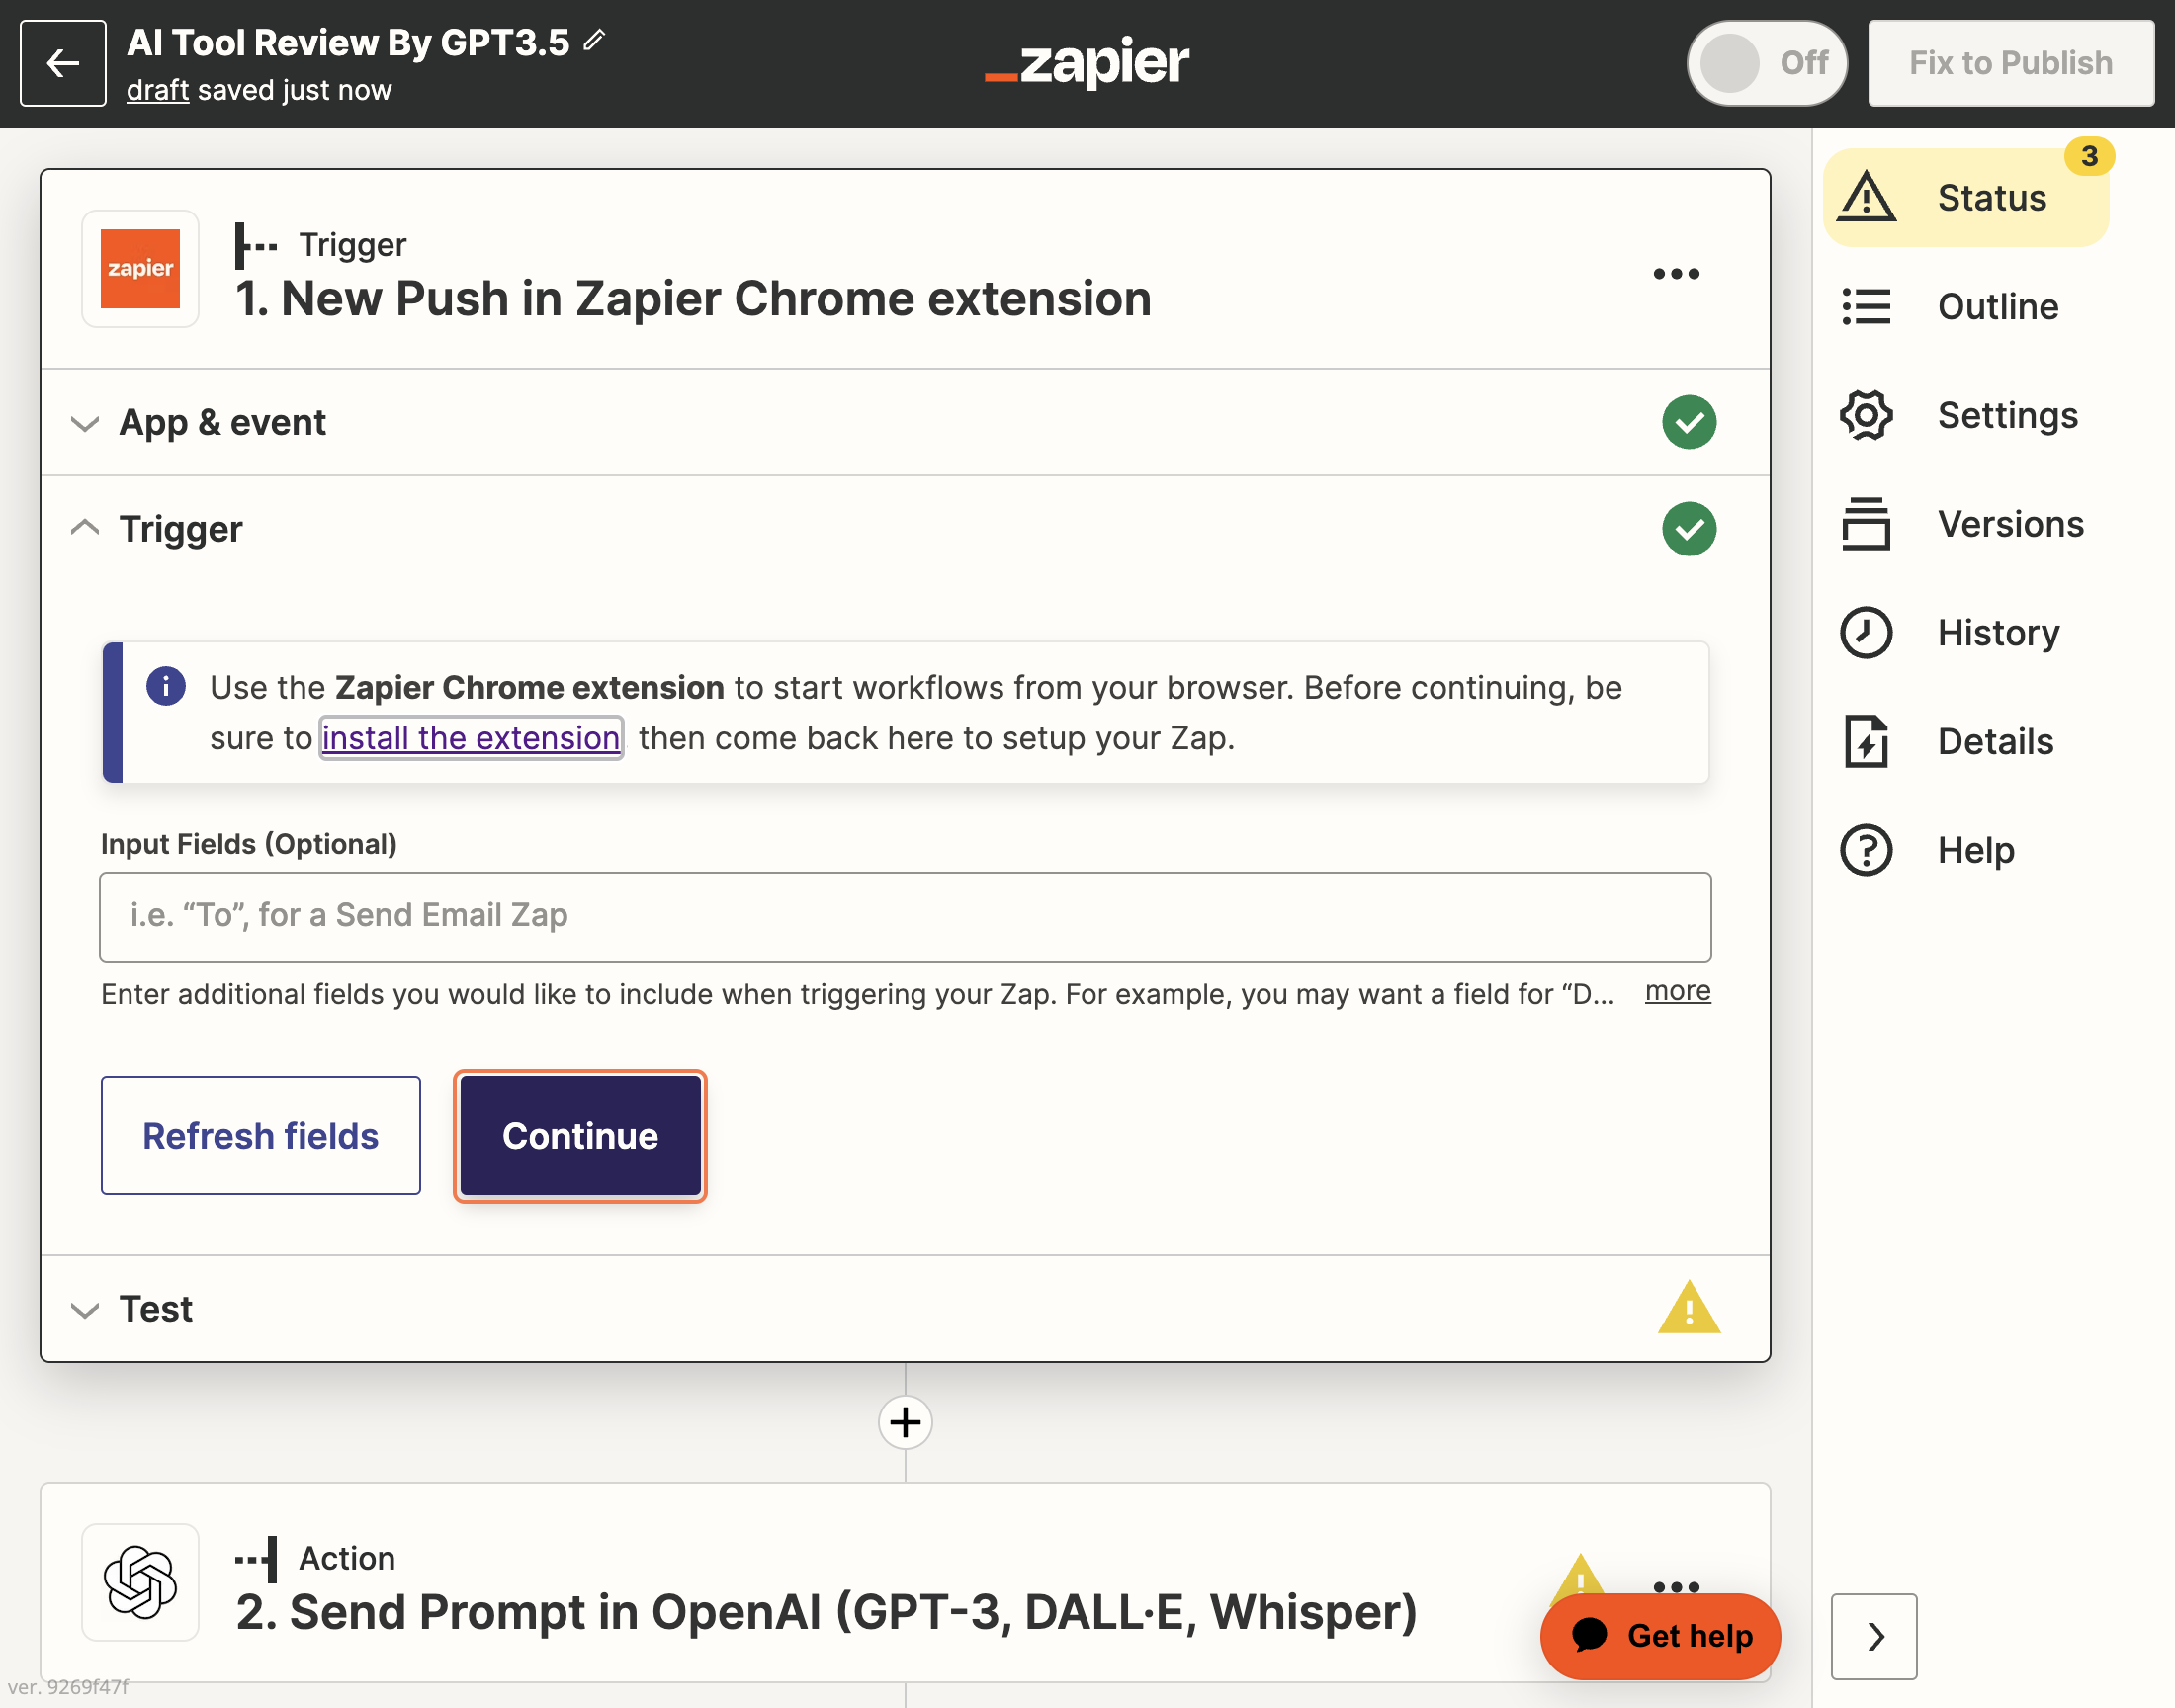 Go back to Zapier and Click on Continue